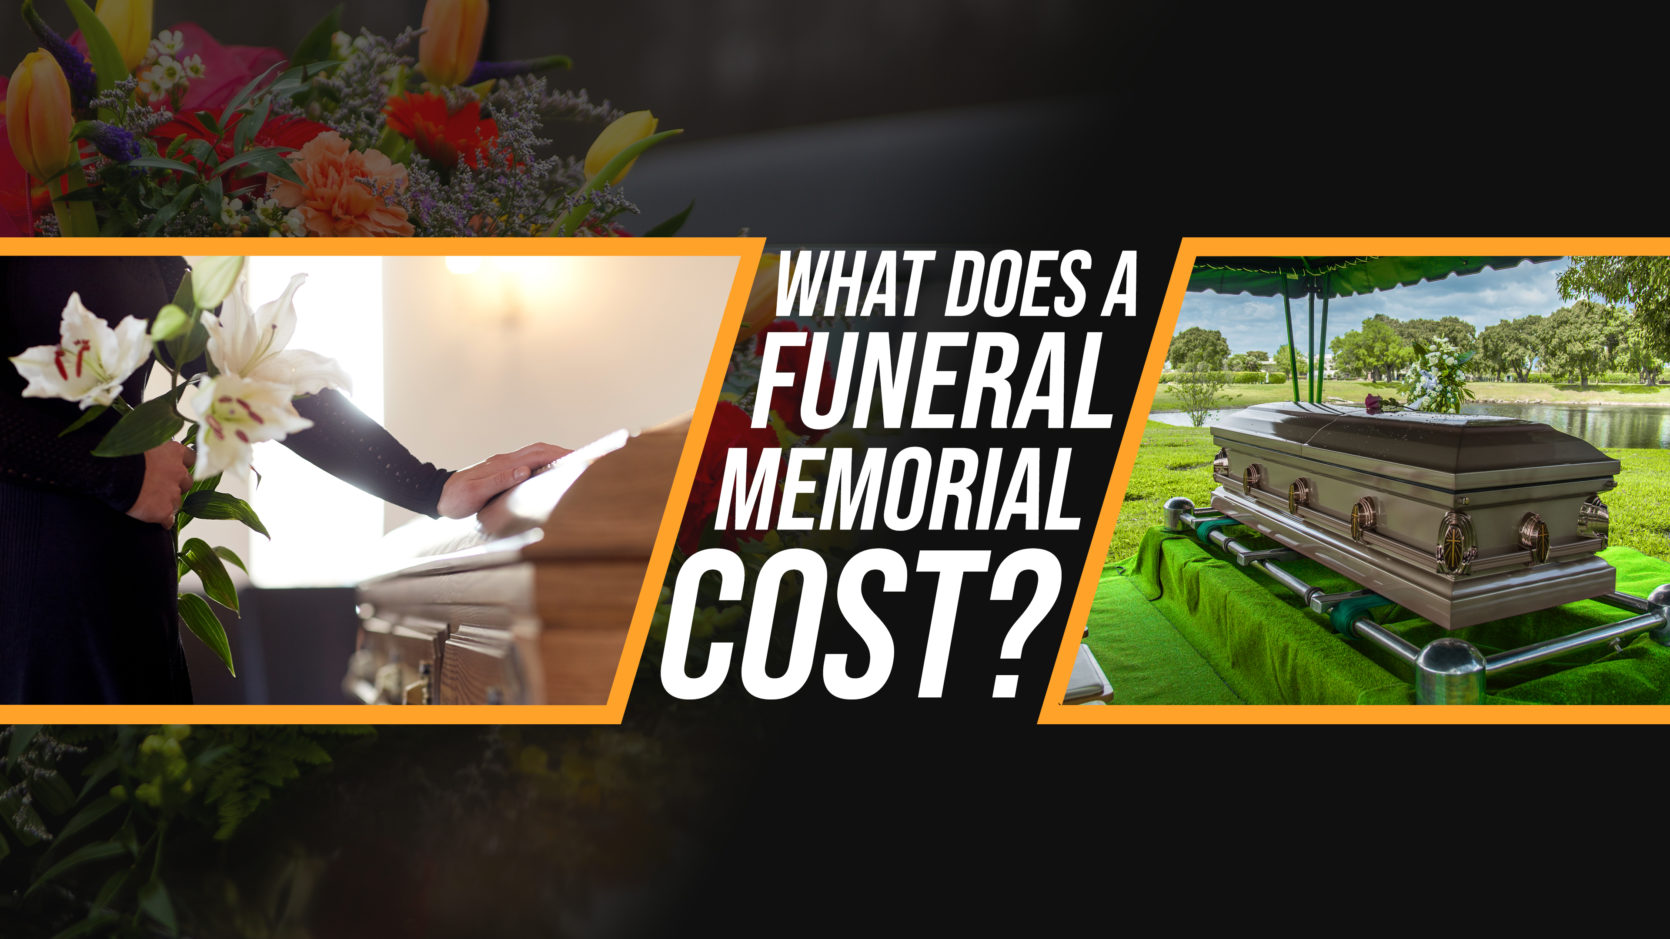 What Does a Funeral Memorial Cost